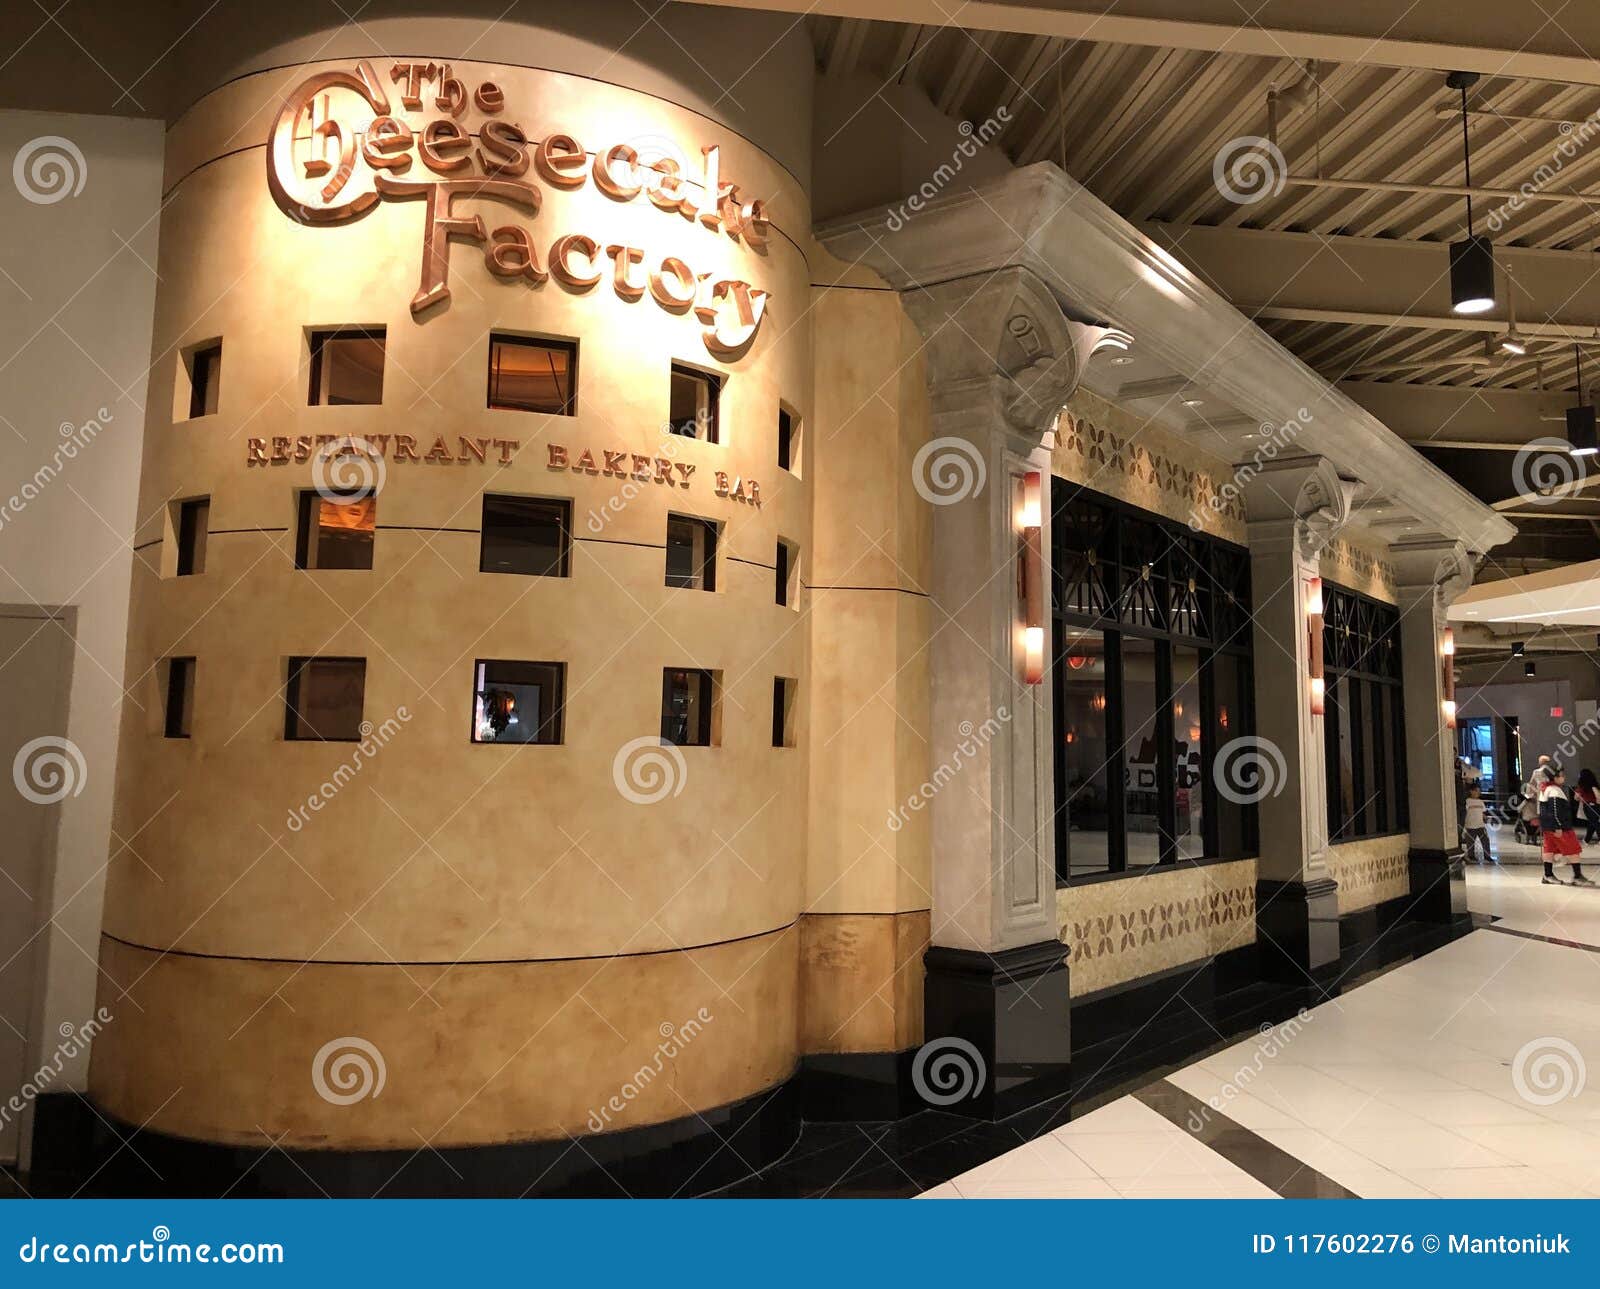 The Cheesecake Factory Editorial Photo Image Of York